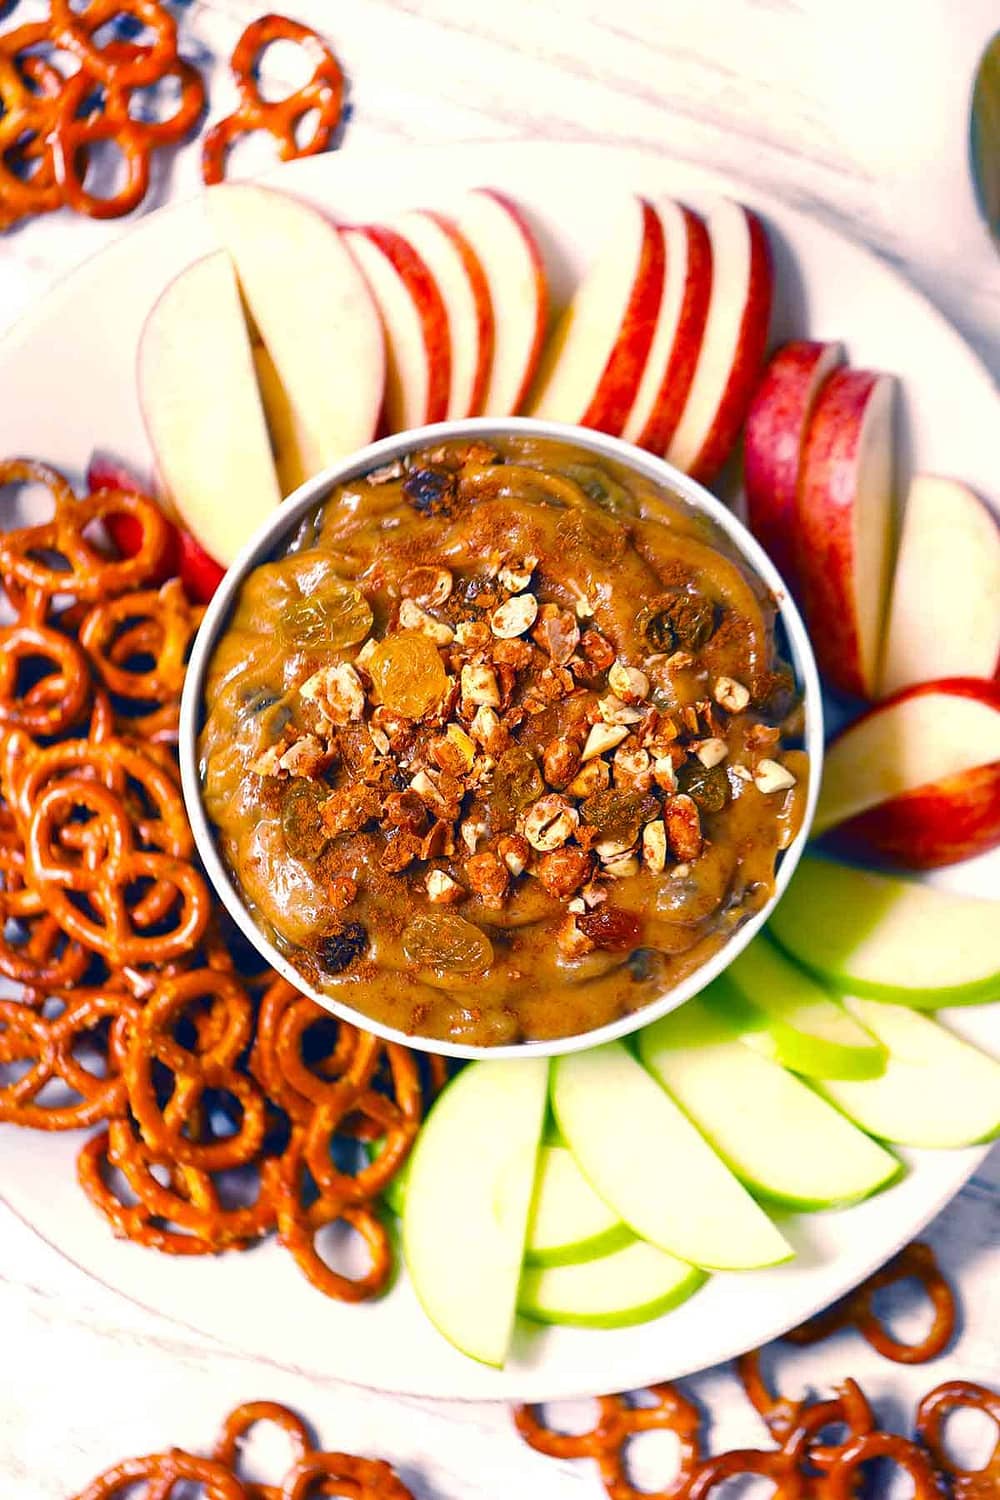 Overhead photo of peanut butter dip with raisins on a plate with apple slices and pretzels around it.